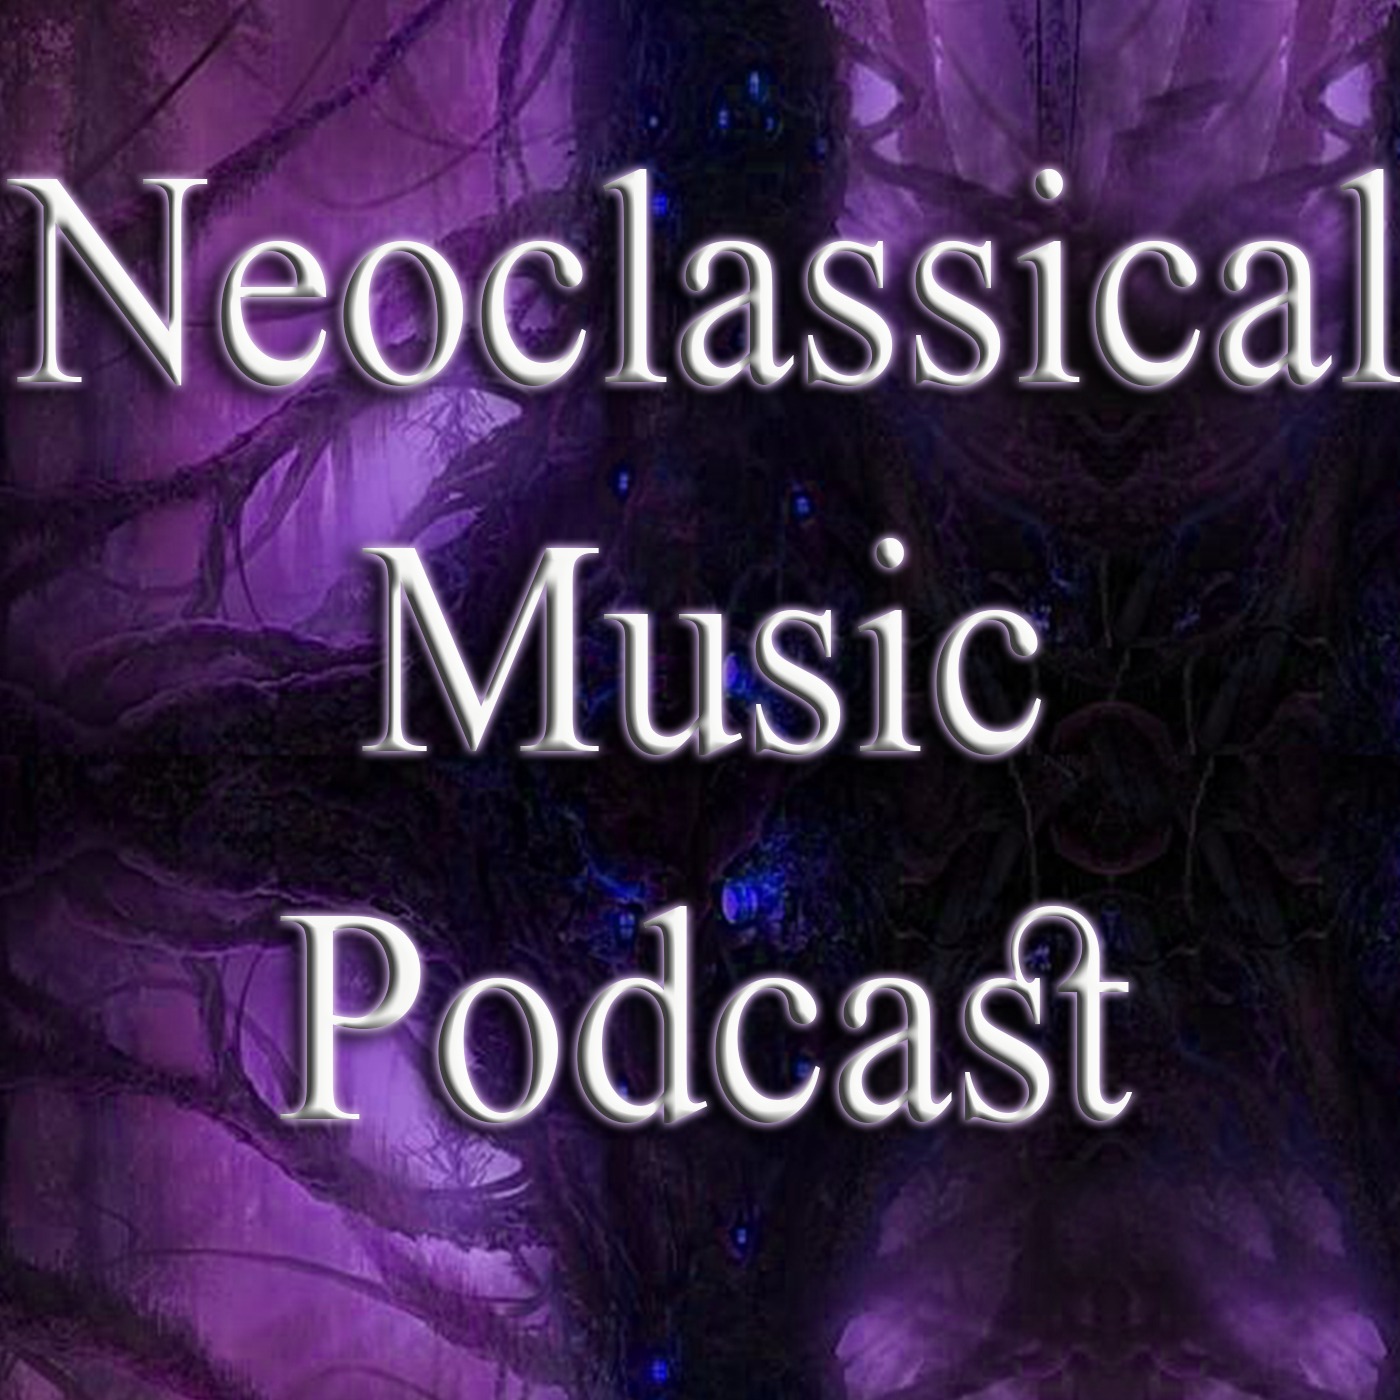 Neoclassical Music Podcast